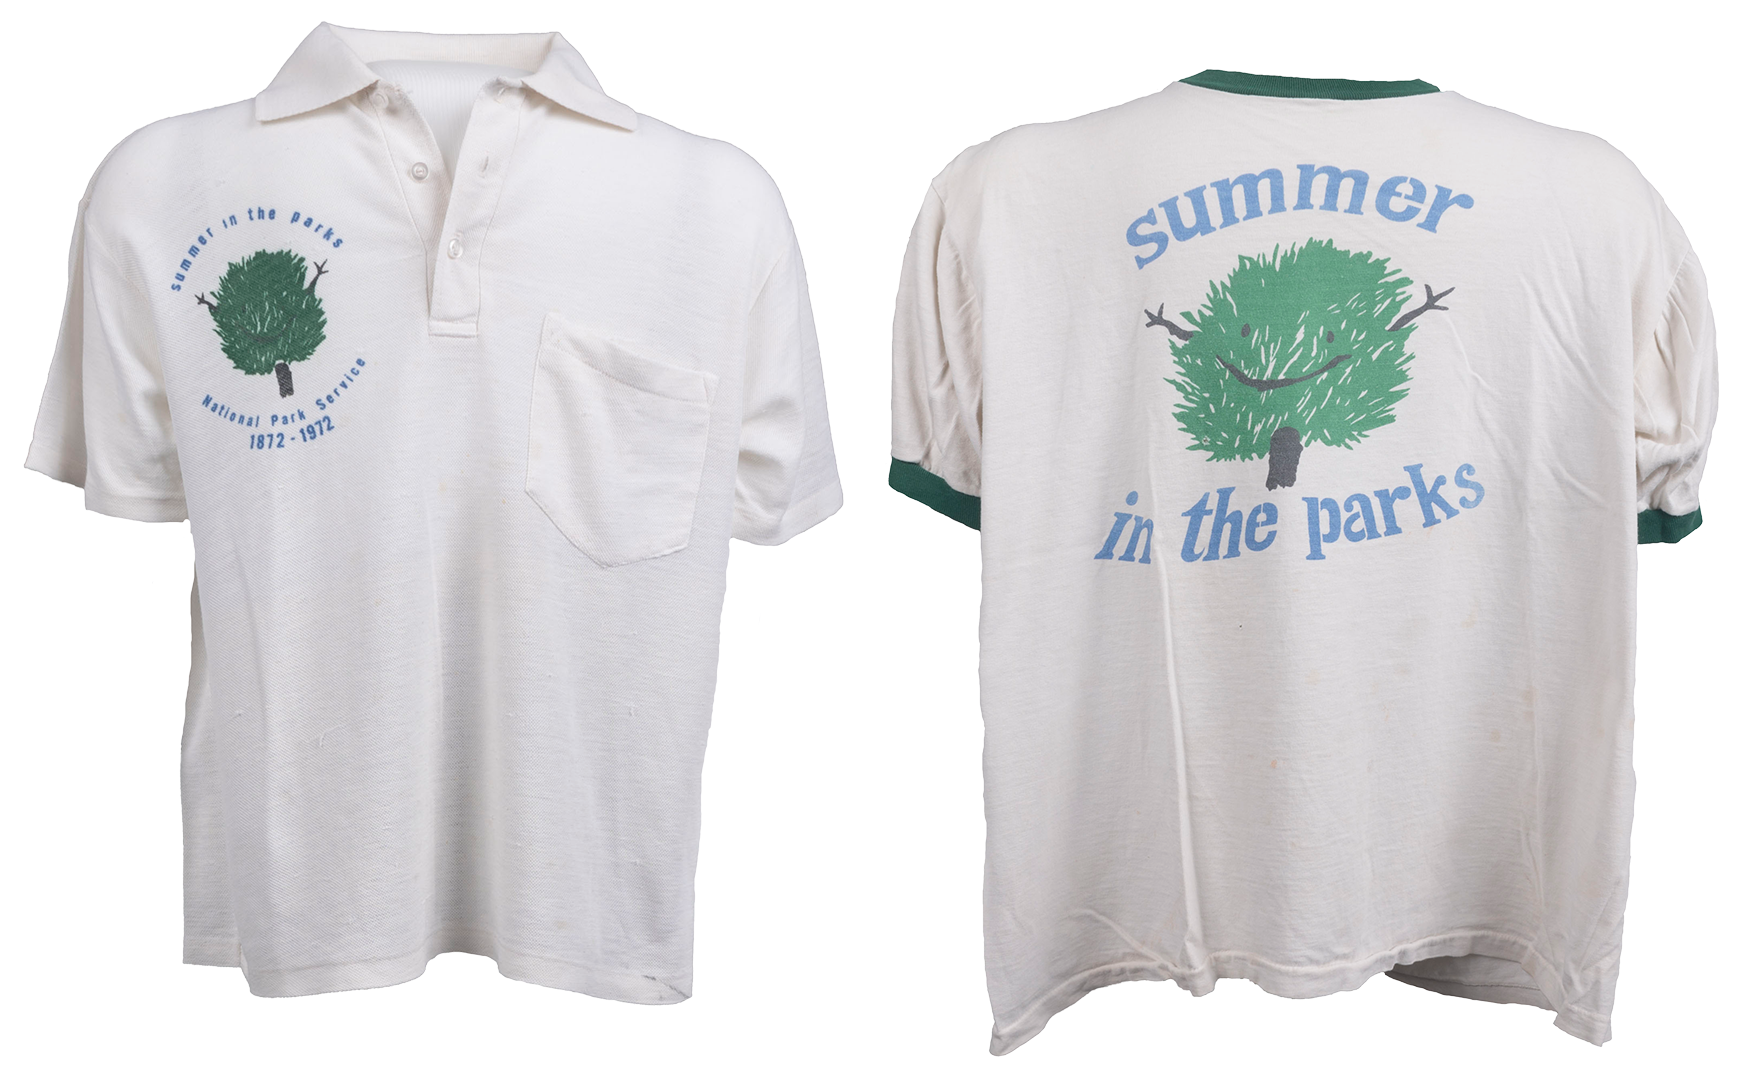 A white polo shirt and white t-shirt with Laughing Tree logo them